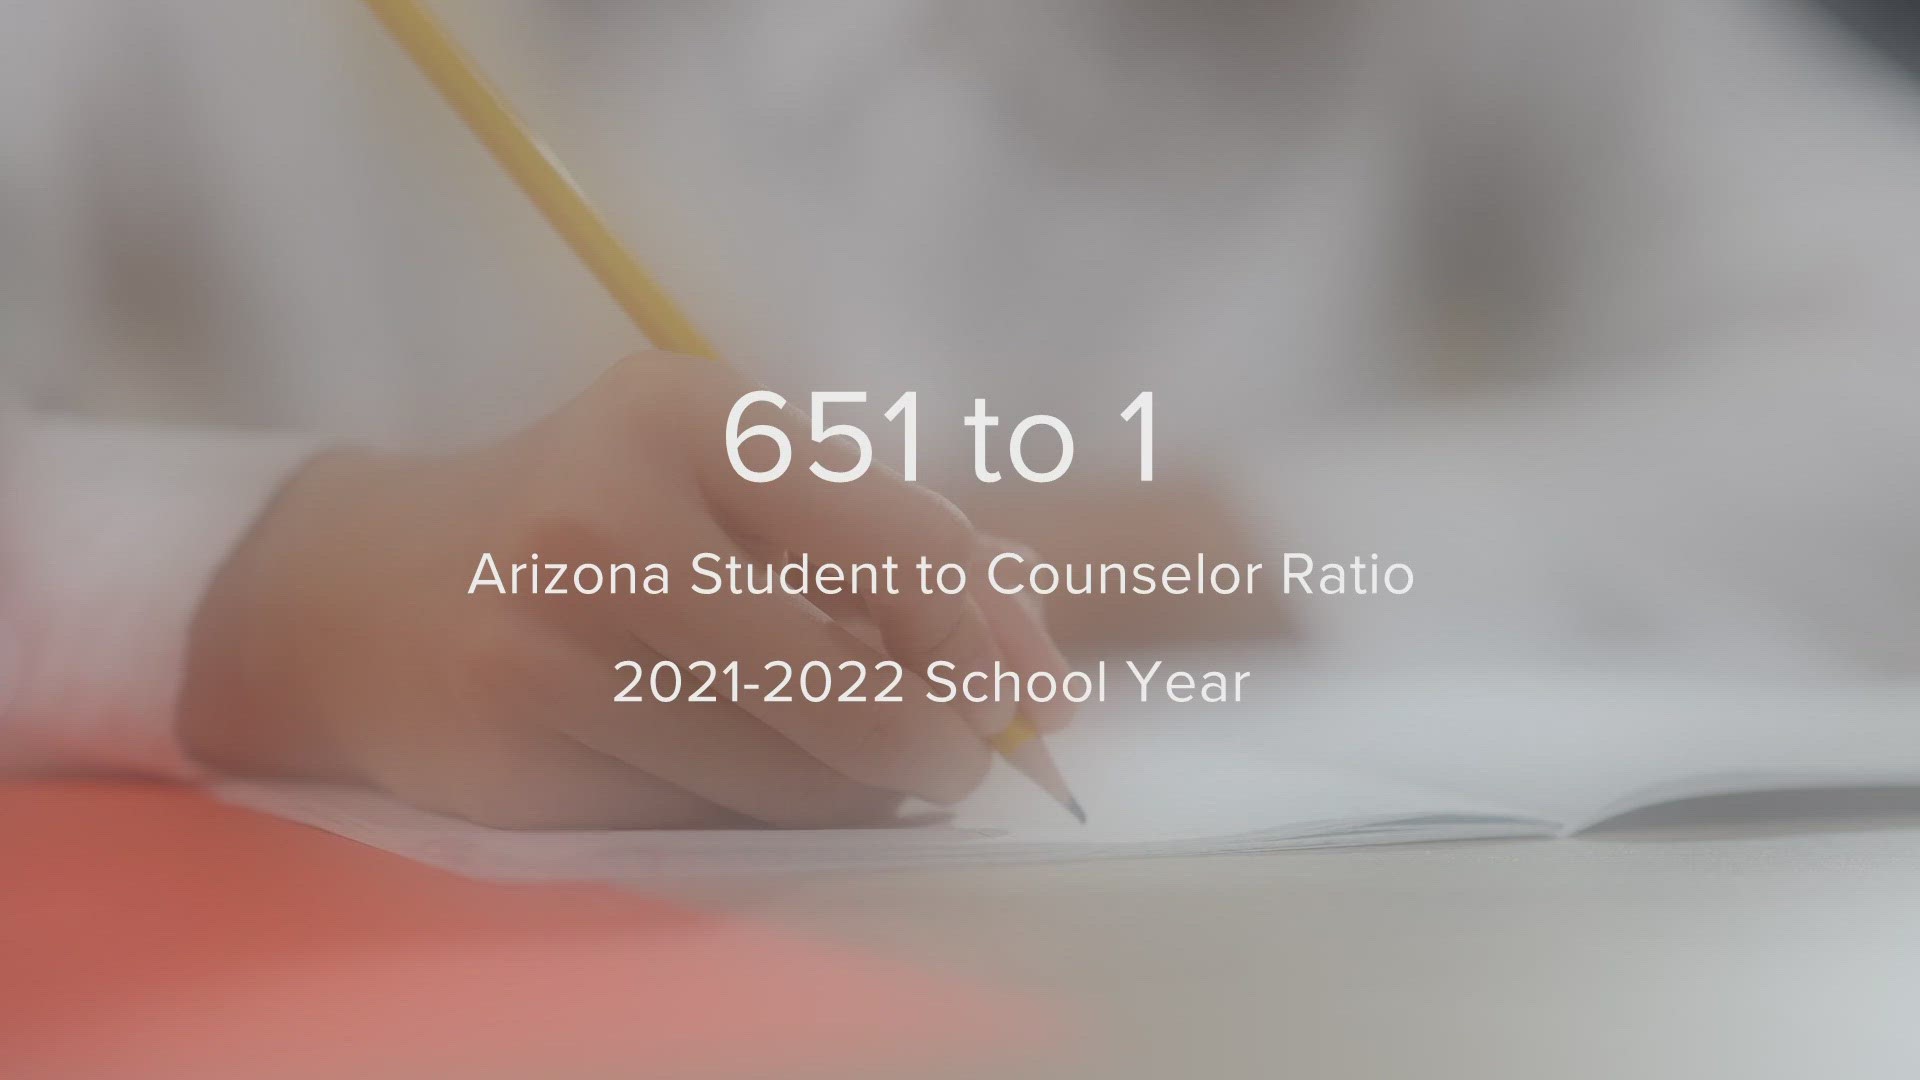 ASU expands counseling curriculum to allow students to obtain school counseling certificate after graduation.